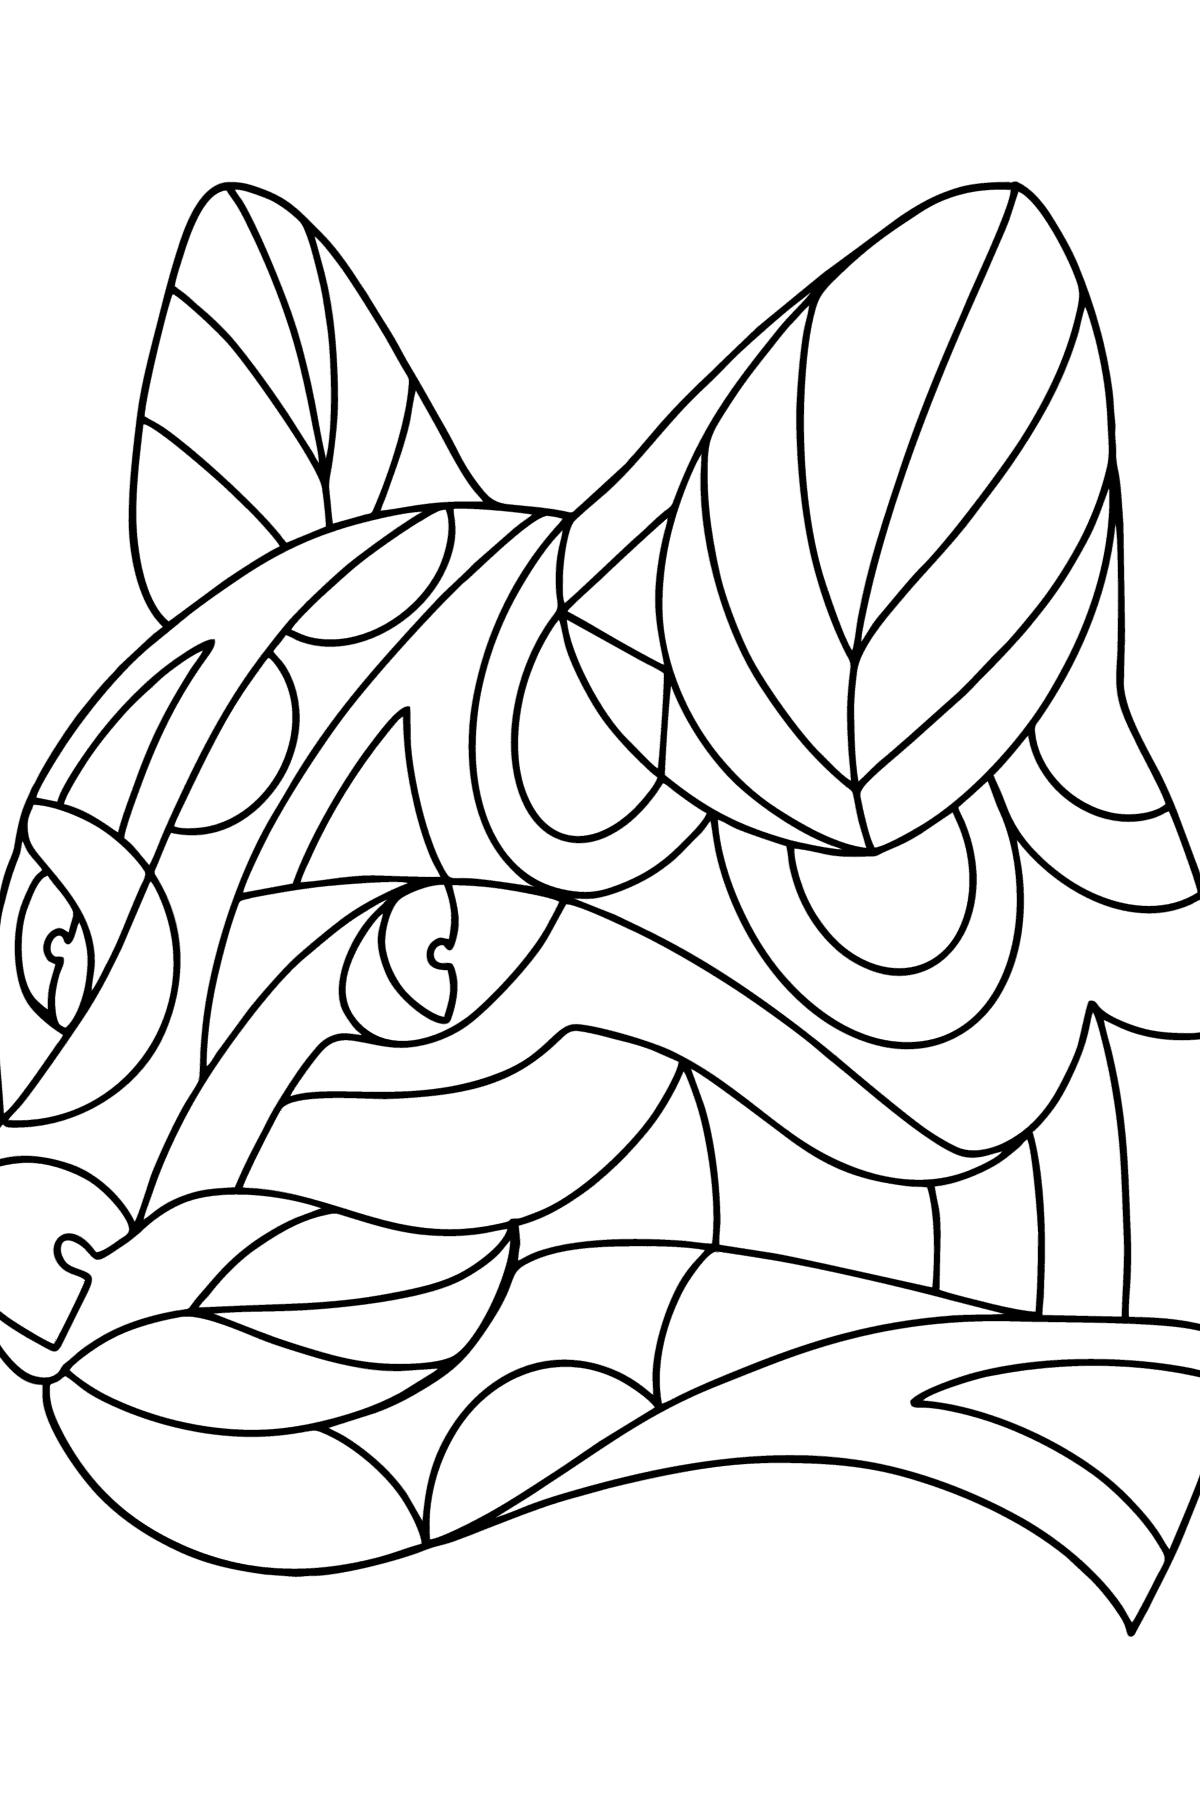 Antistress Cat coloring page - Coloring Pages for Kids